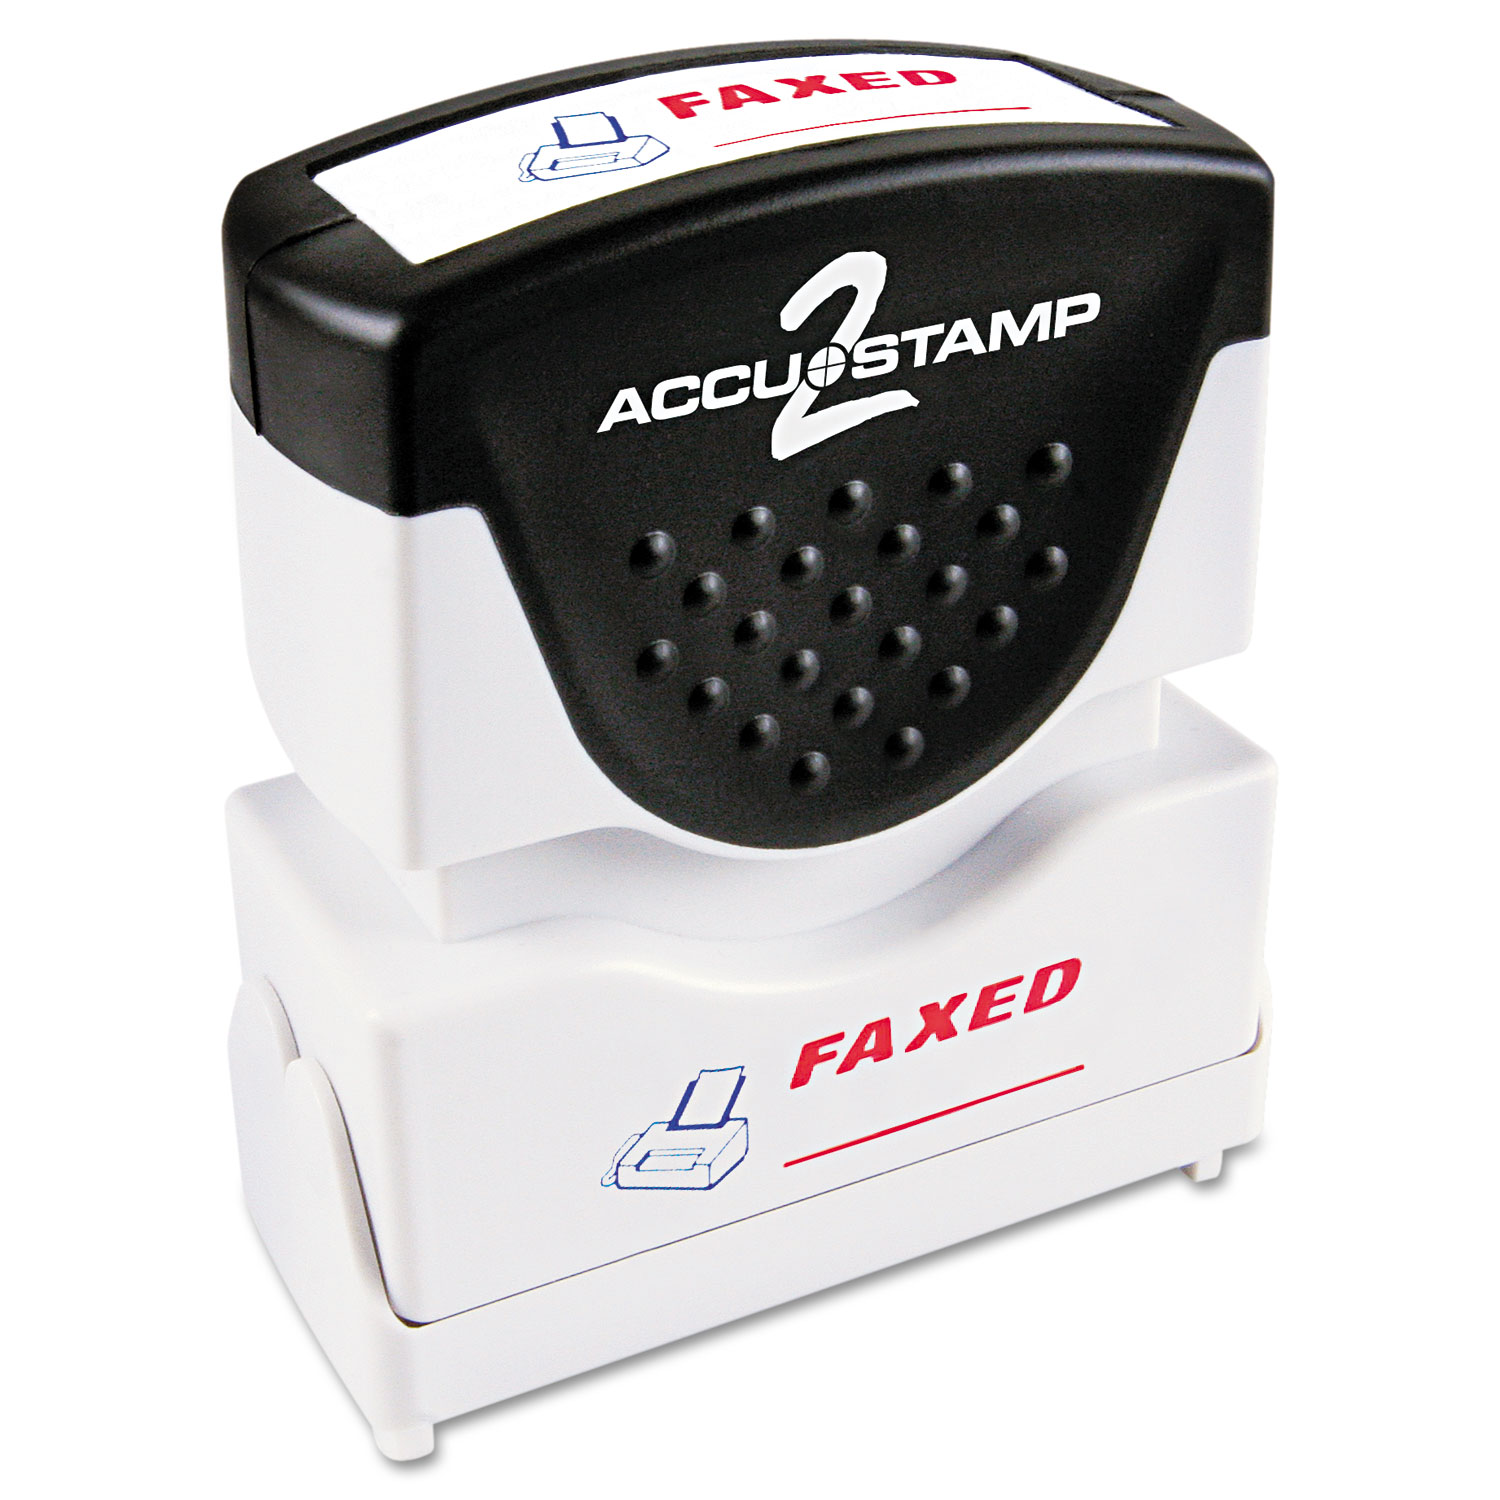  ACCUSTAMP2 035533 Pre-Inked Shutter Stamp, Red/Blue, FAXED, 1 5/8 x 1/2 (COS035533) 